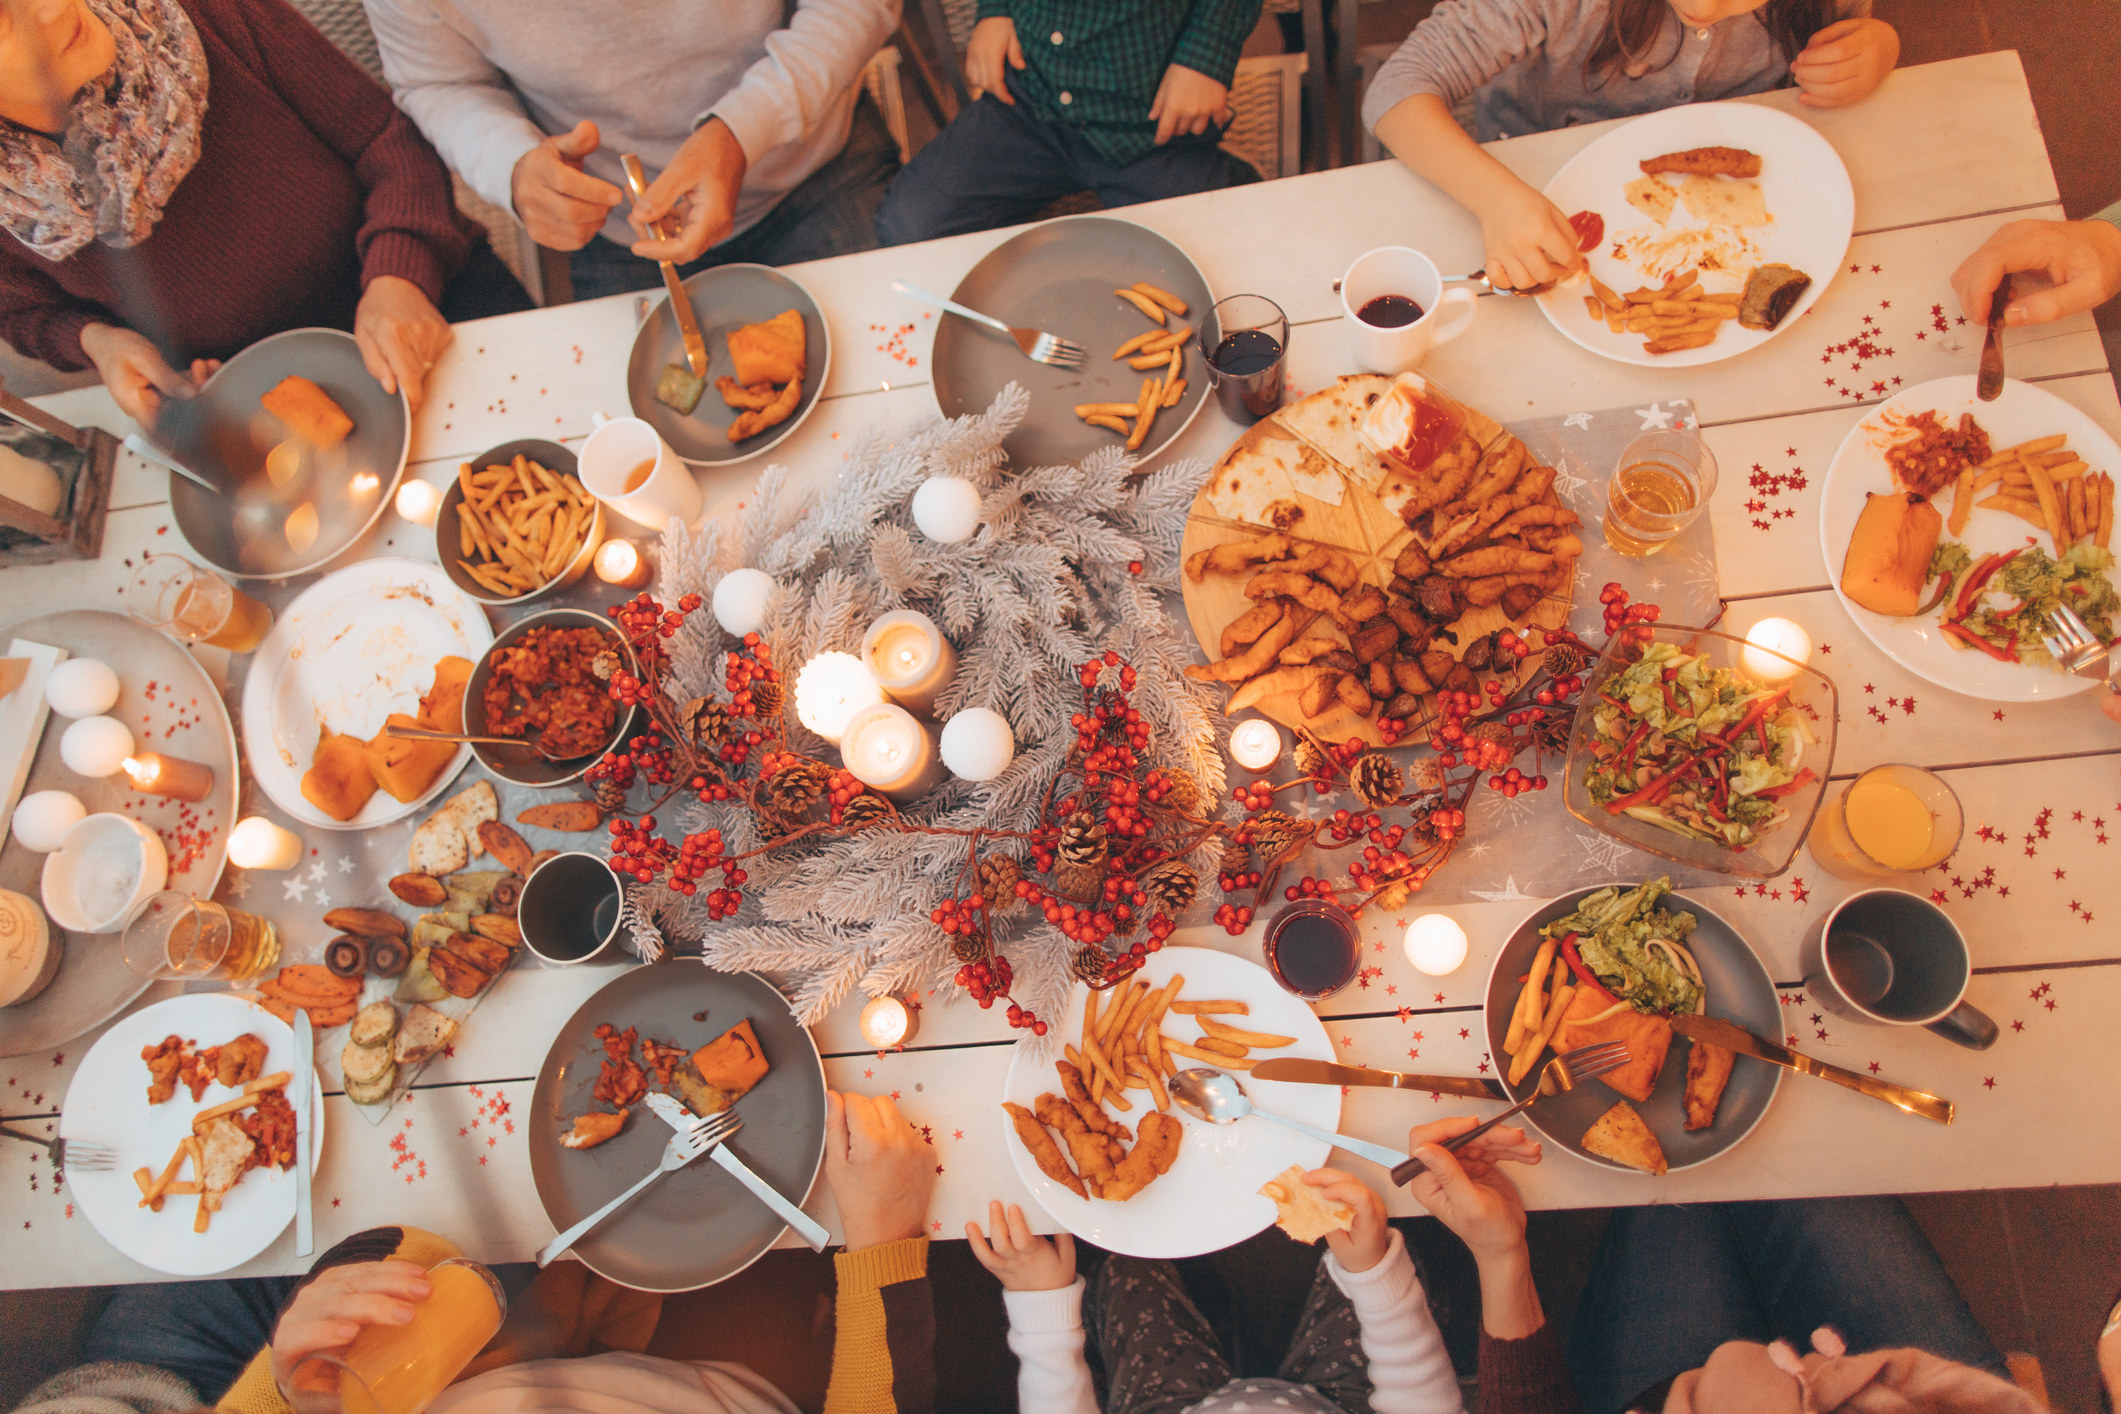 A Thanksgiving table from above